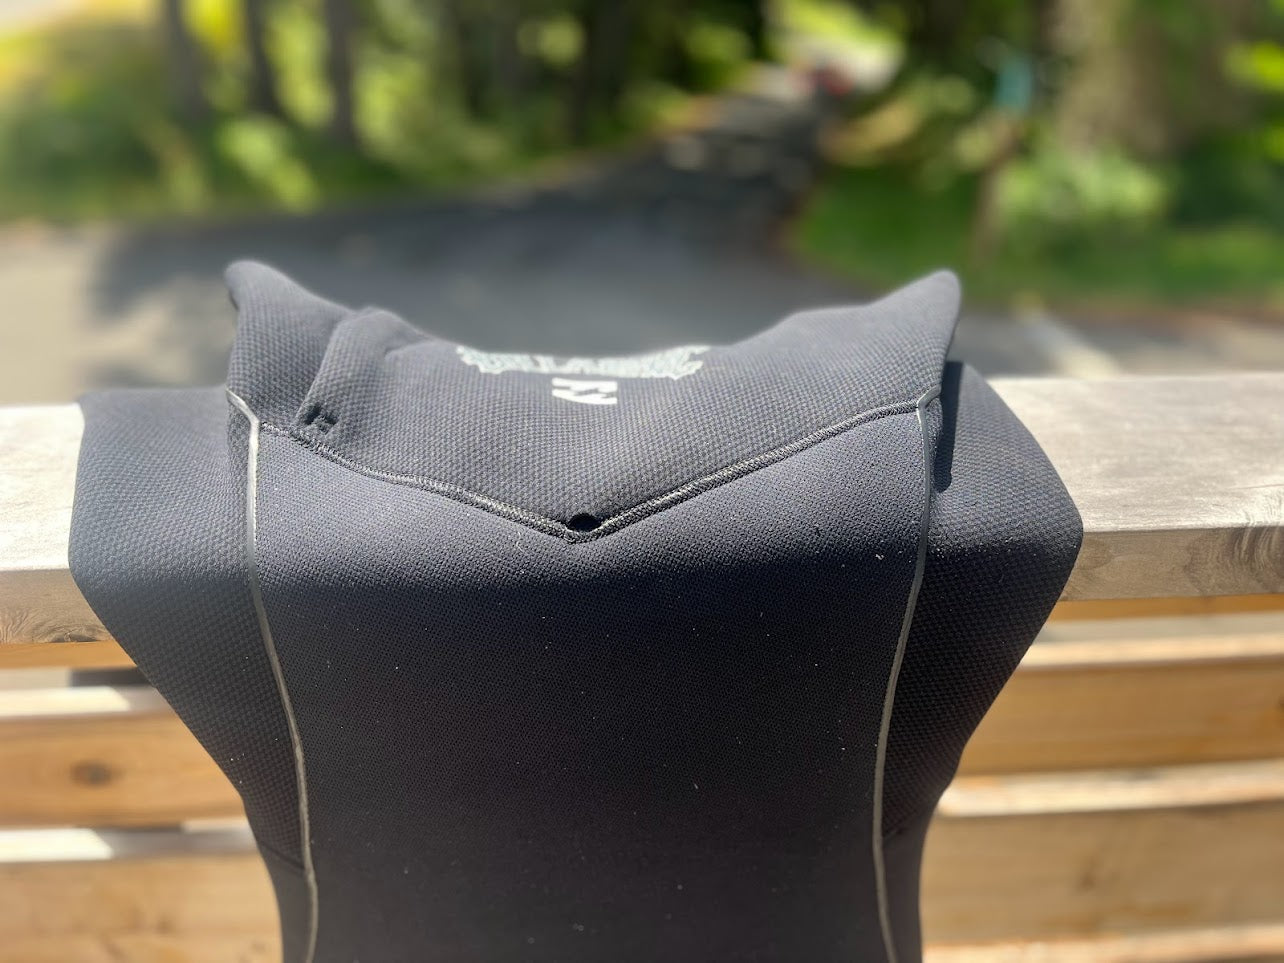 Billabong Furnace Comp 4/3 Hooded Wetsuit Review - Back Closeoup